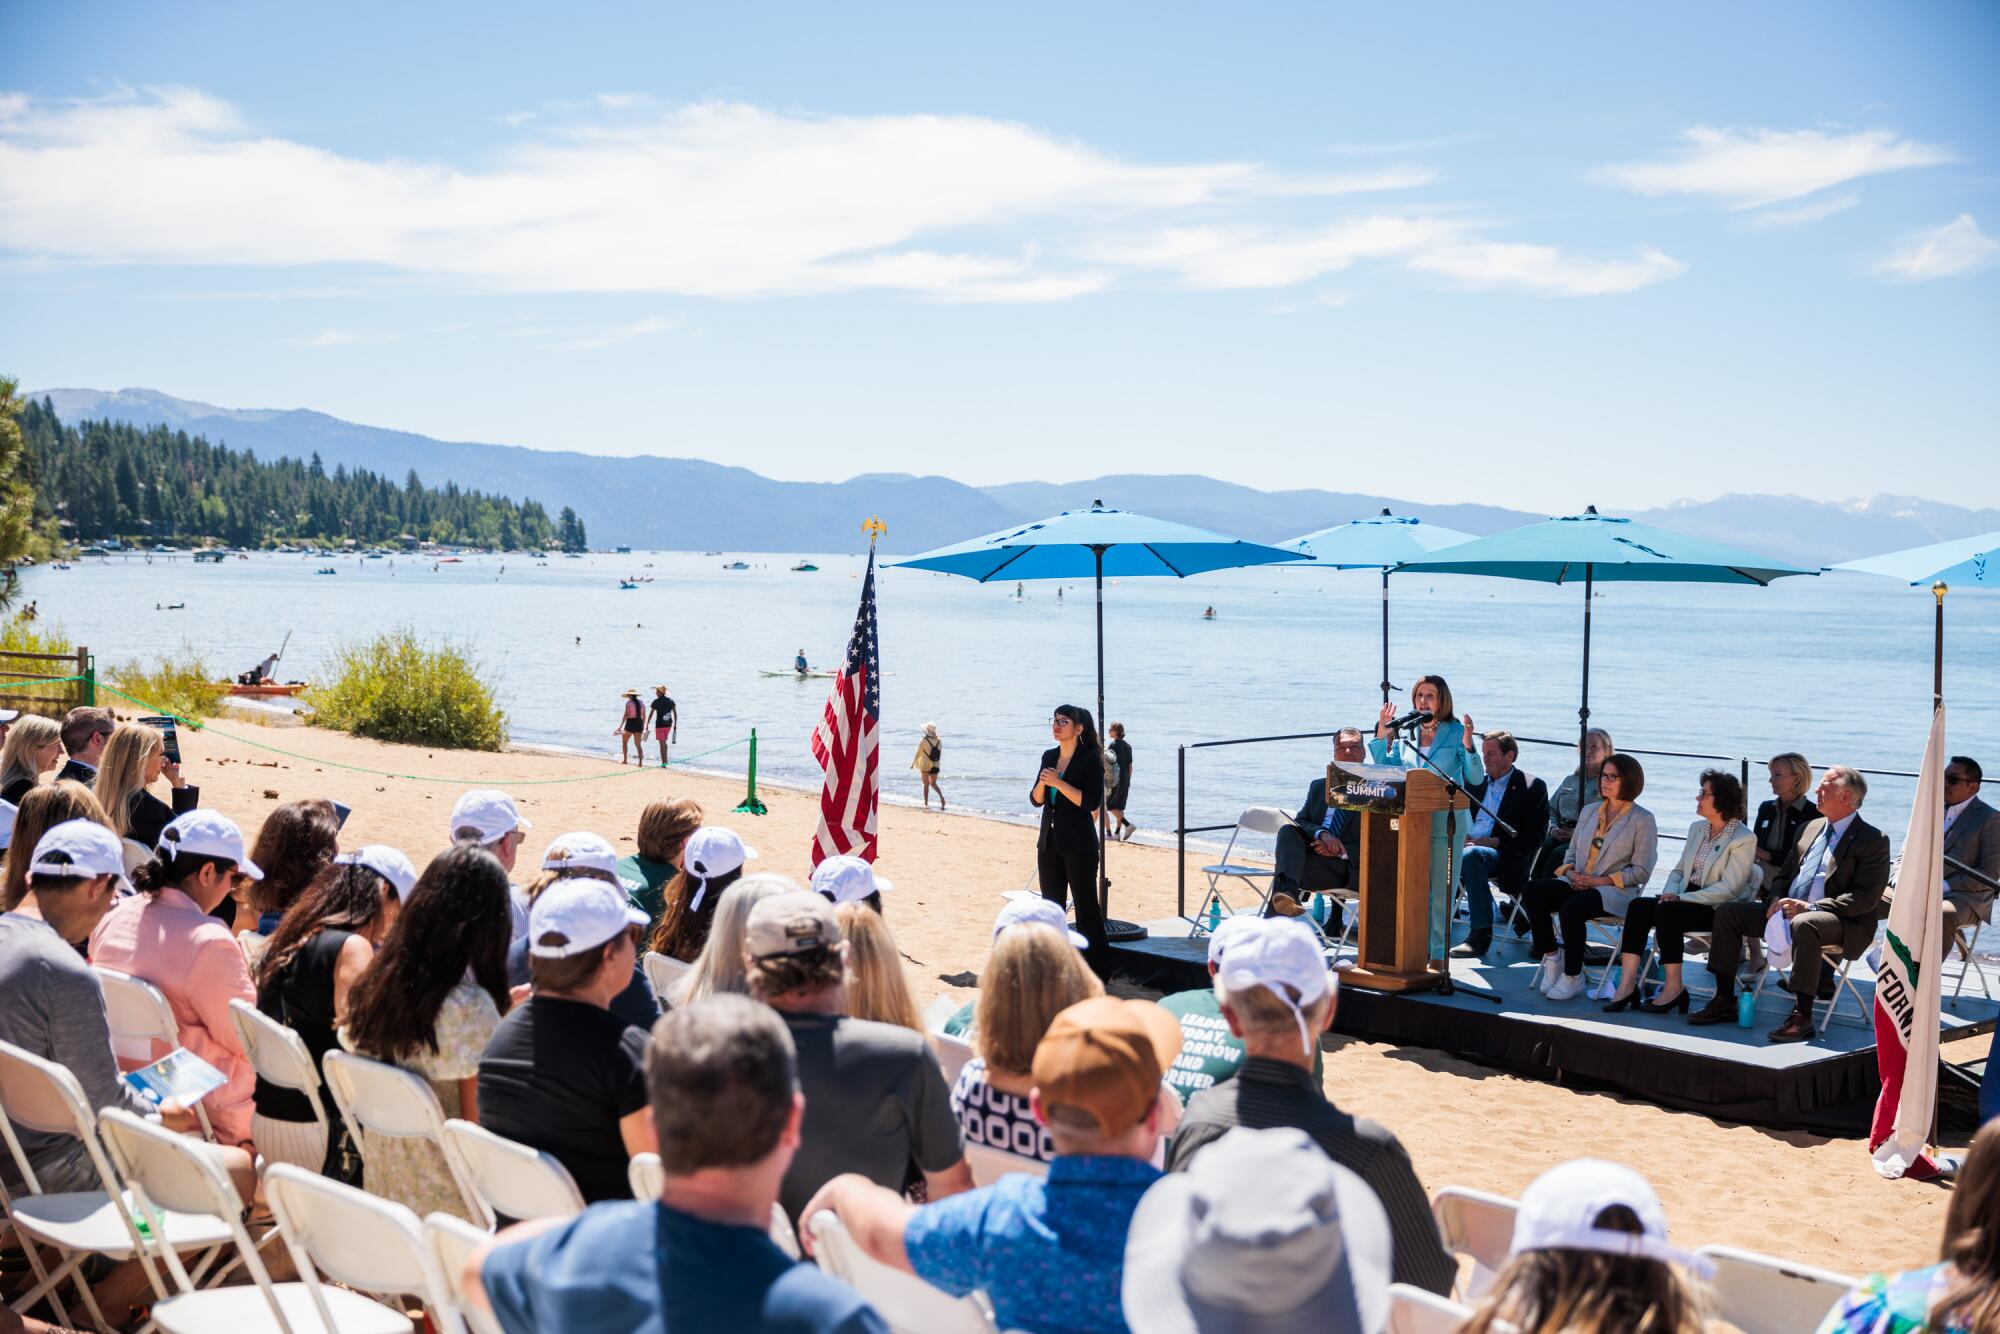 Seated people look toward a speaker at a lectern next to a body of water.